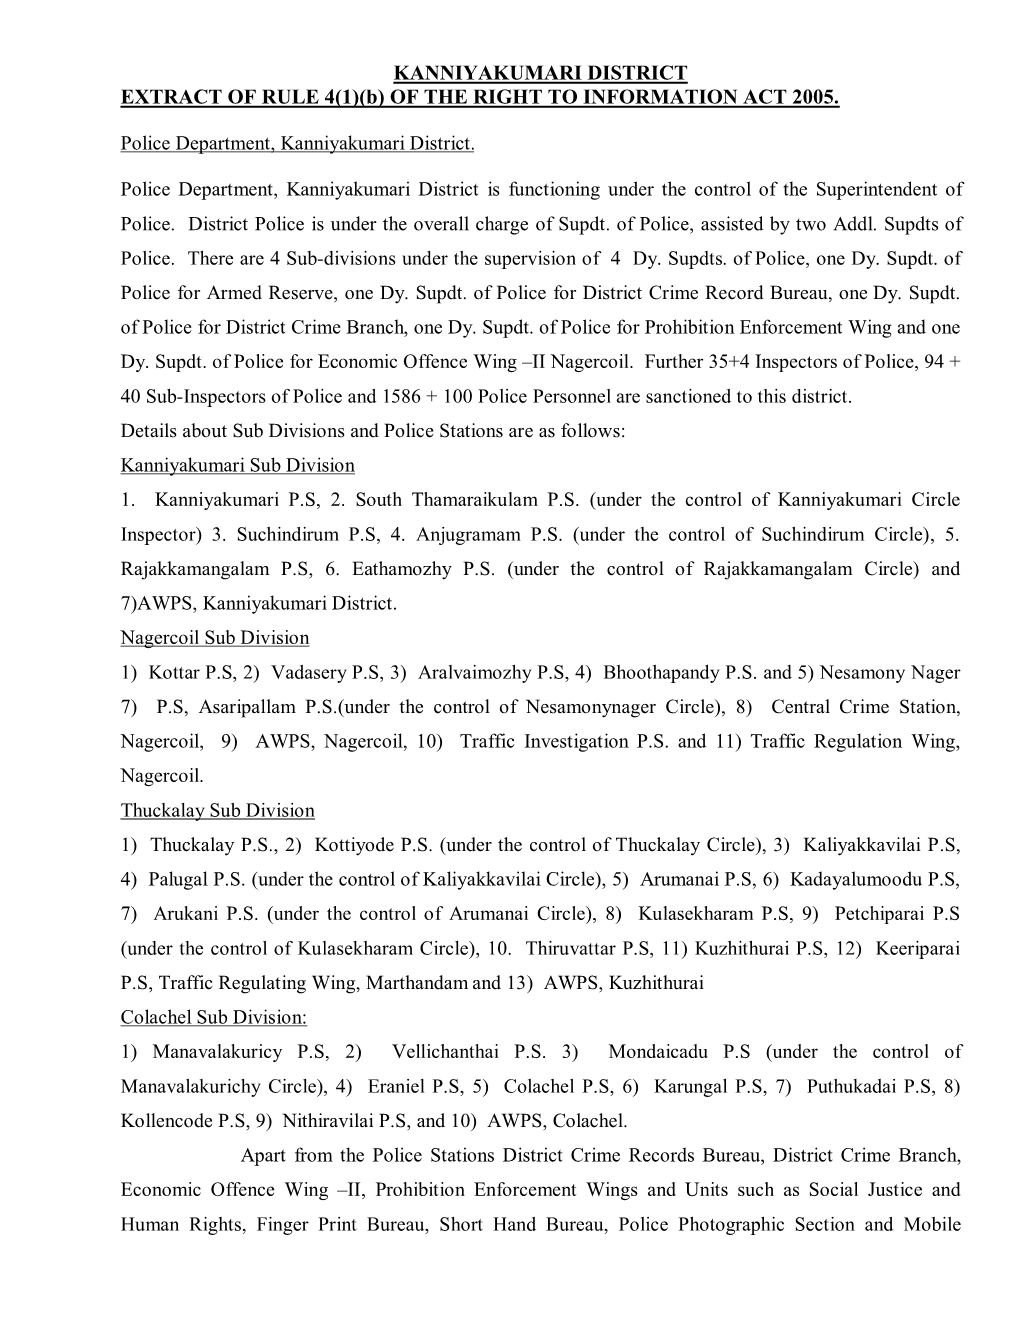 KANNIYAKUMARI DISTRICT EXTRACT of RULE 4(1)(B) of the RIGHT to INFORMATION ACT 2005